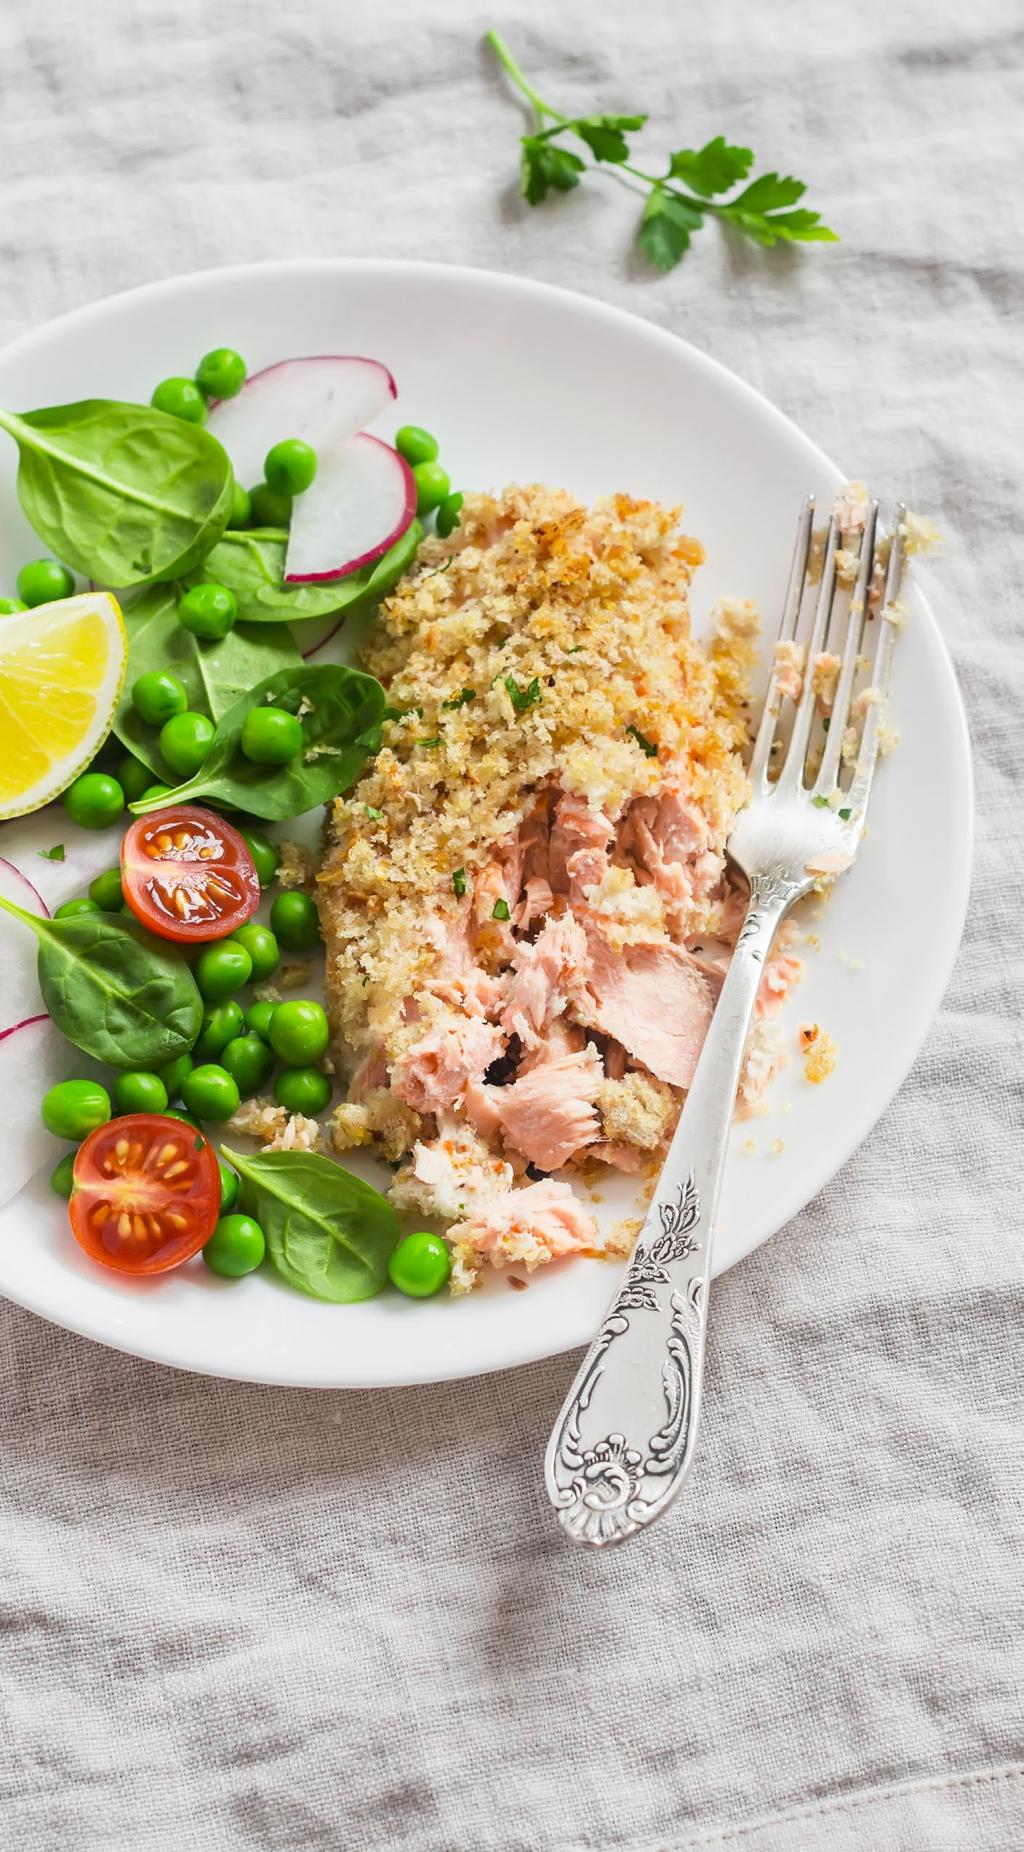 WILD SALMON SALAD 1 SERVING Can of wild salmon, packed in water Juice of half a lemon 1 tablespoon of extra-virgin olive oil Small amount of chopped vegetables : celery, carrots, cucumber, tomatoes,